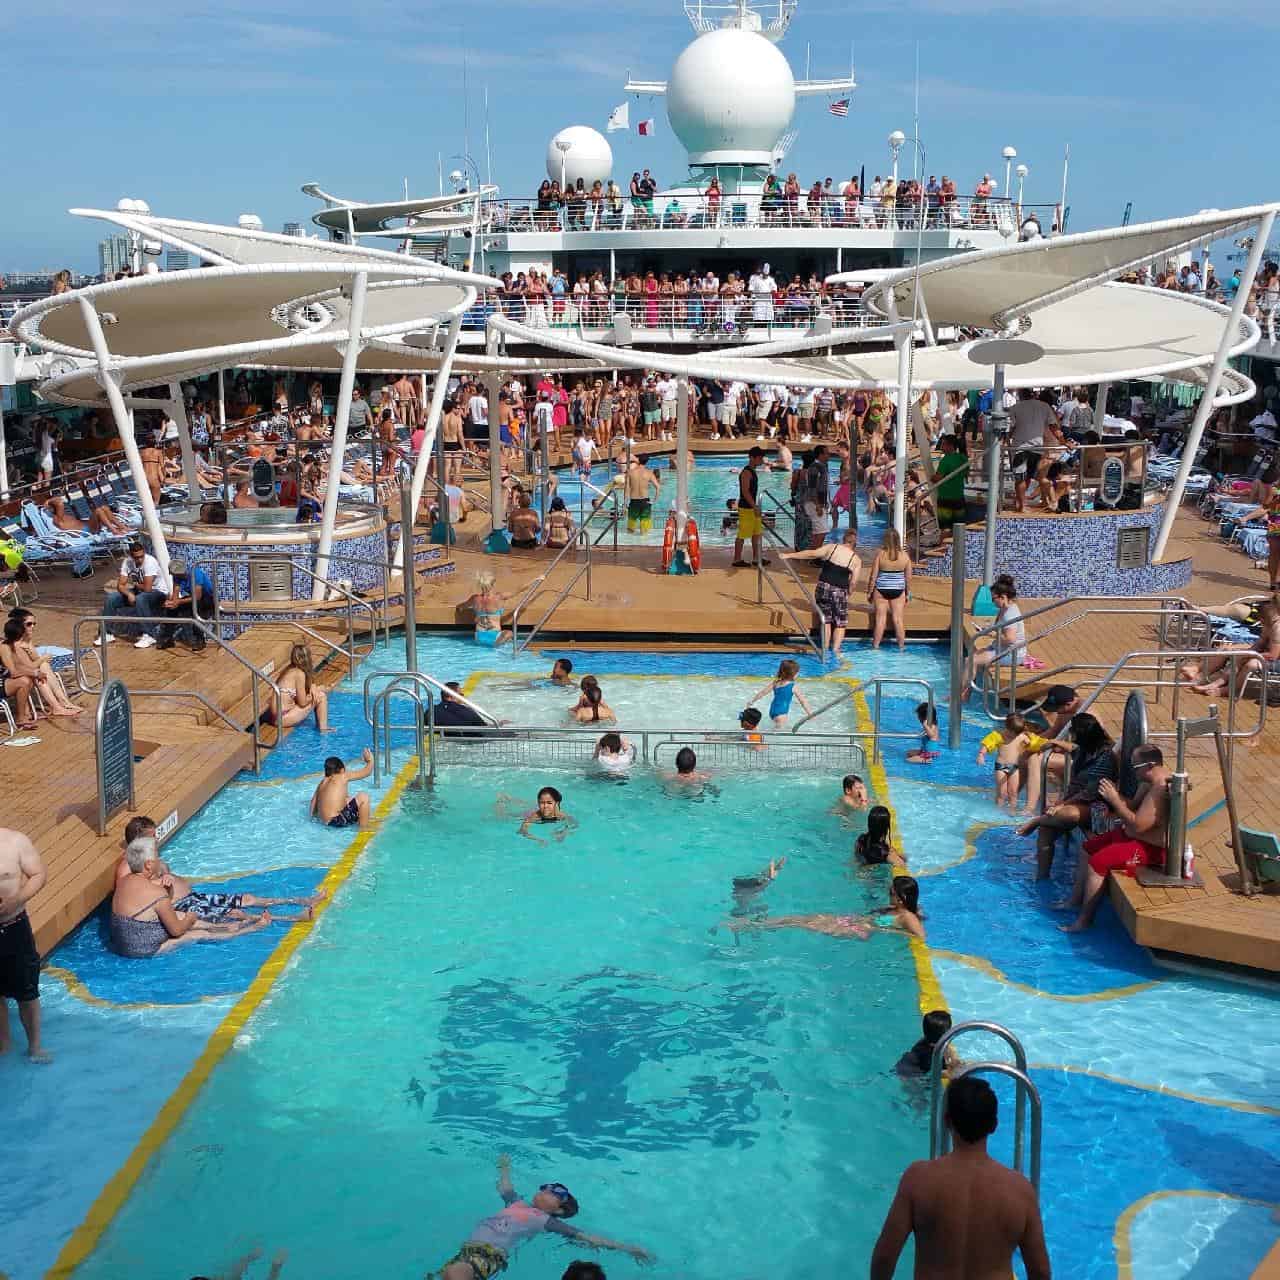 Need a cruise with lots of activity and fun?